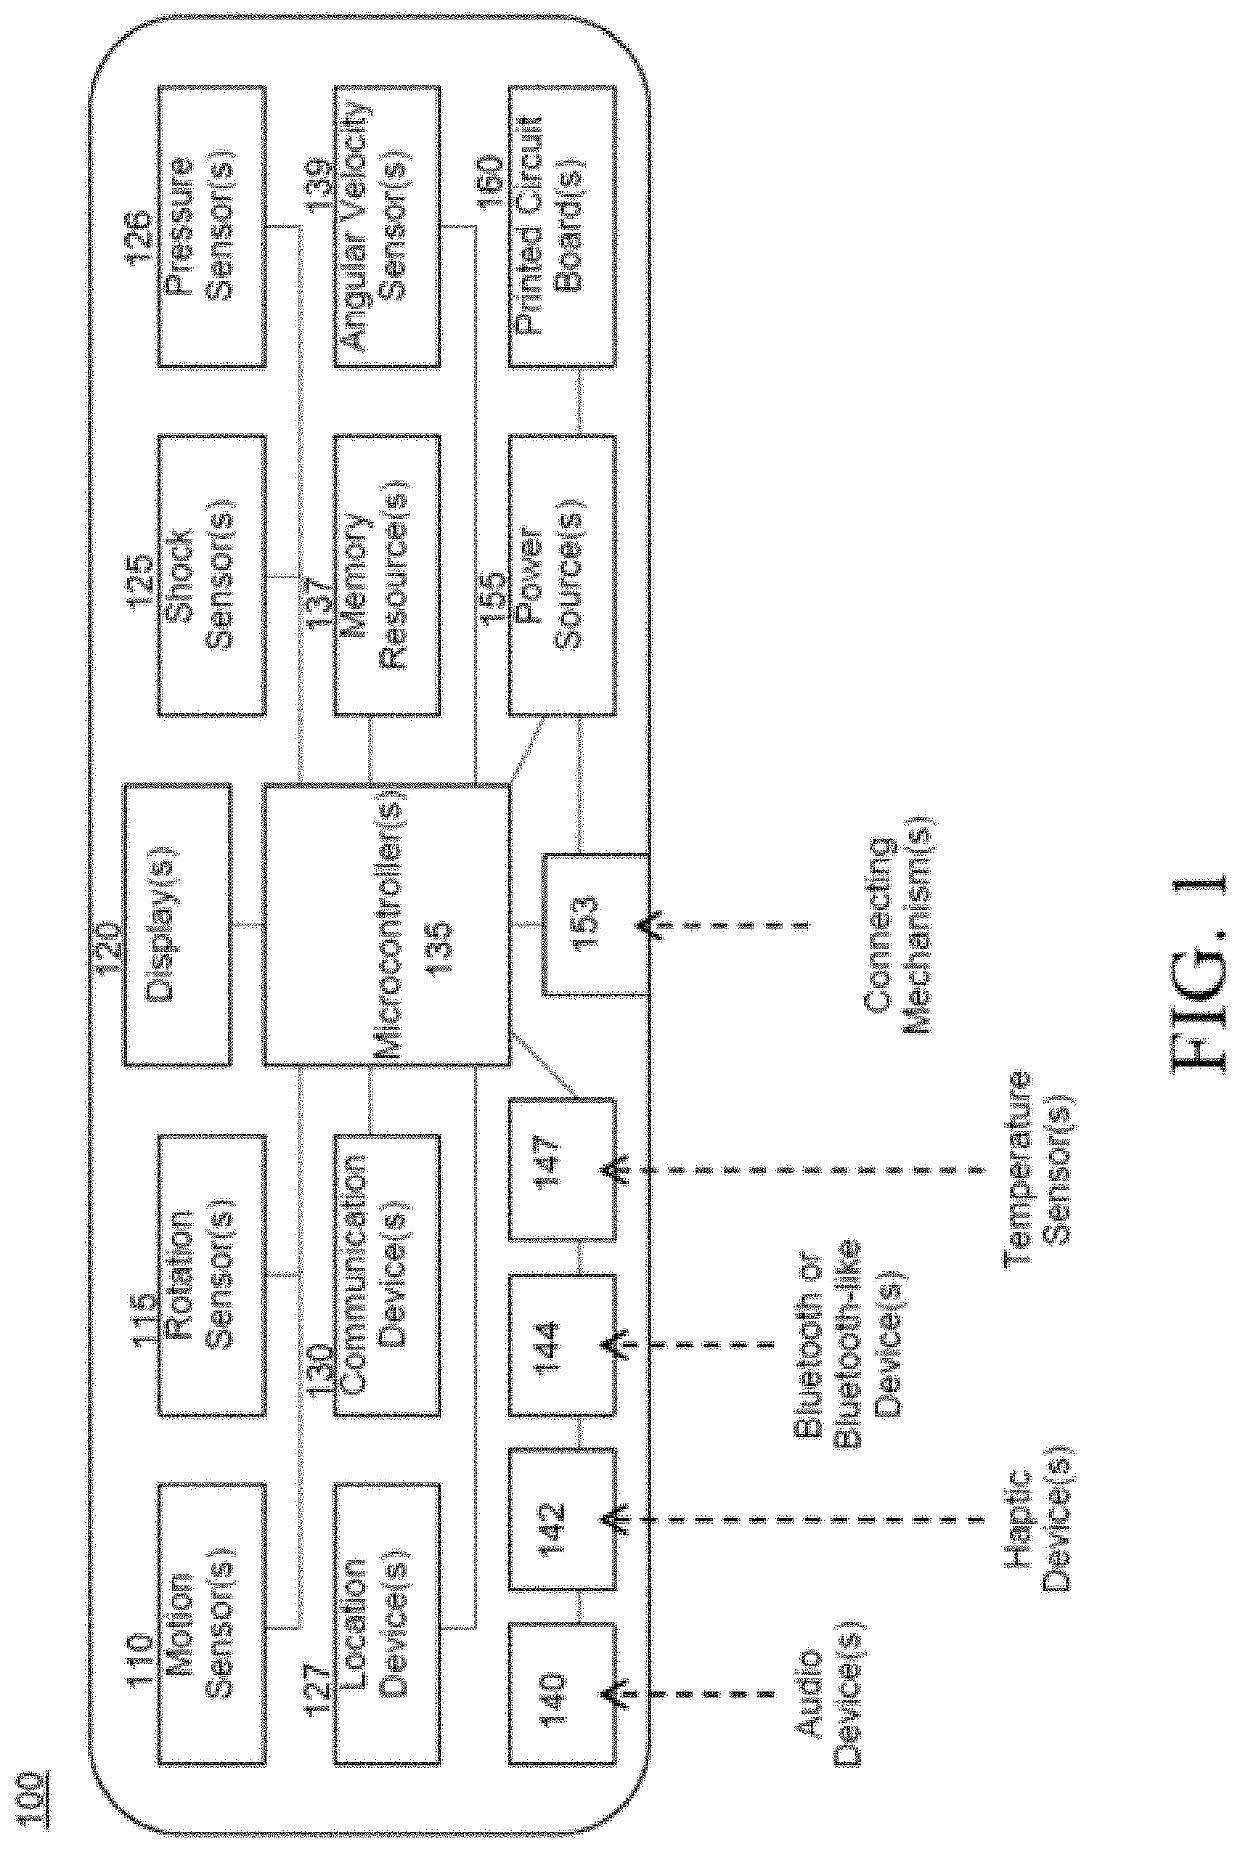 Emergency notification apparatus and method